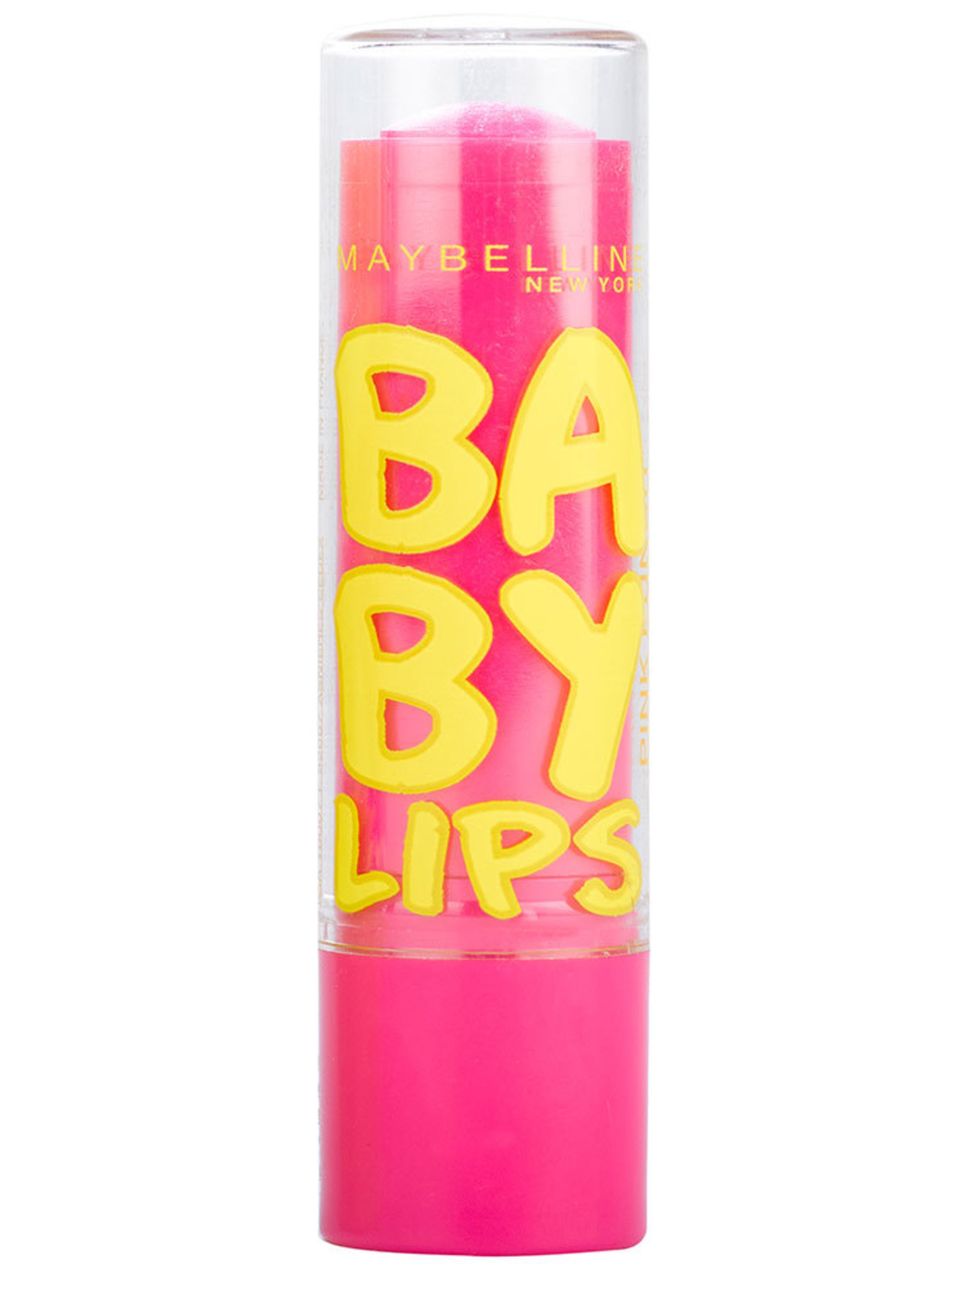 <p><a href="http://www.boots.com/en/Maybelline-Baby-Lips-Electro-Lip-Balm_1505230/?cm_mmc=pla-_-google-_-PLAs-_-Boots+Shopping+-+Category+-+Beauty" target="_blank">Maybelline Babylips in Pink Punch, £2.99</a></p>

<p>Babylips is a backstage favourite and 